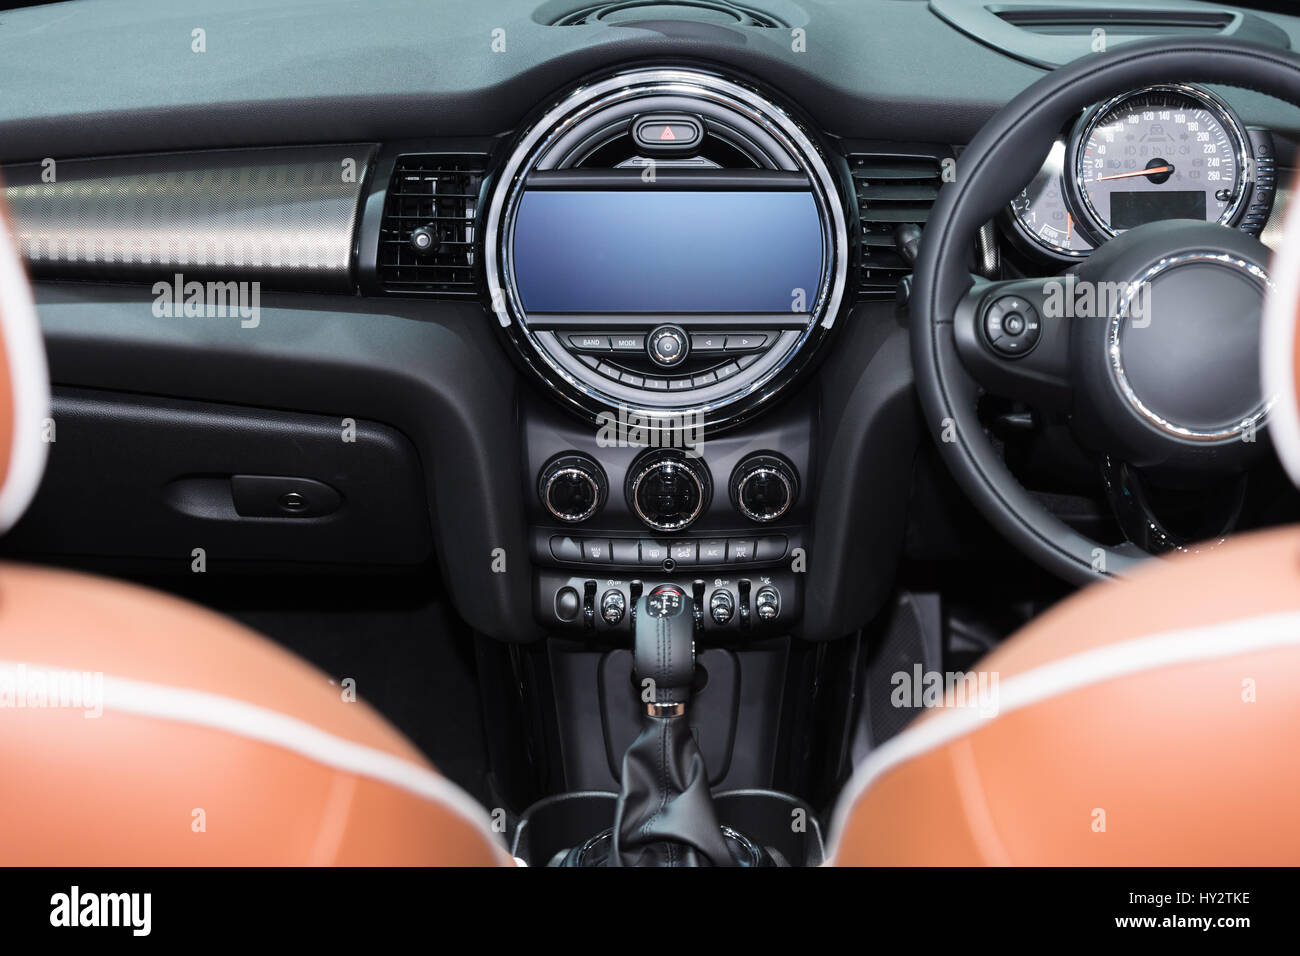 Interior view of car. Modern technology car dashboard, radio and aircondition control button. Stock Photo